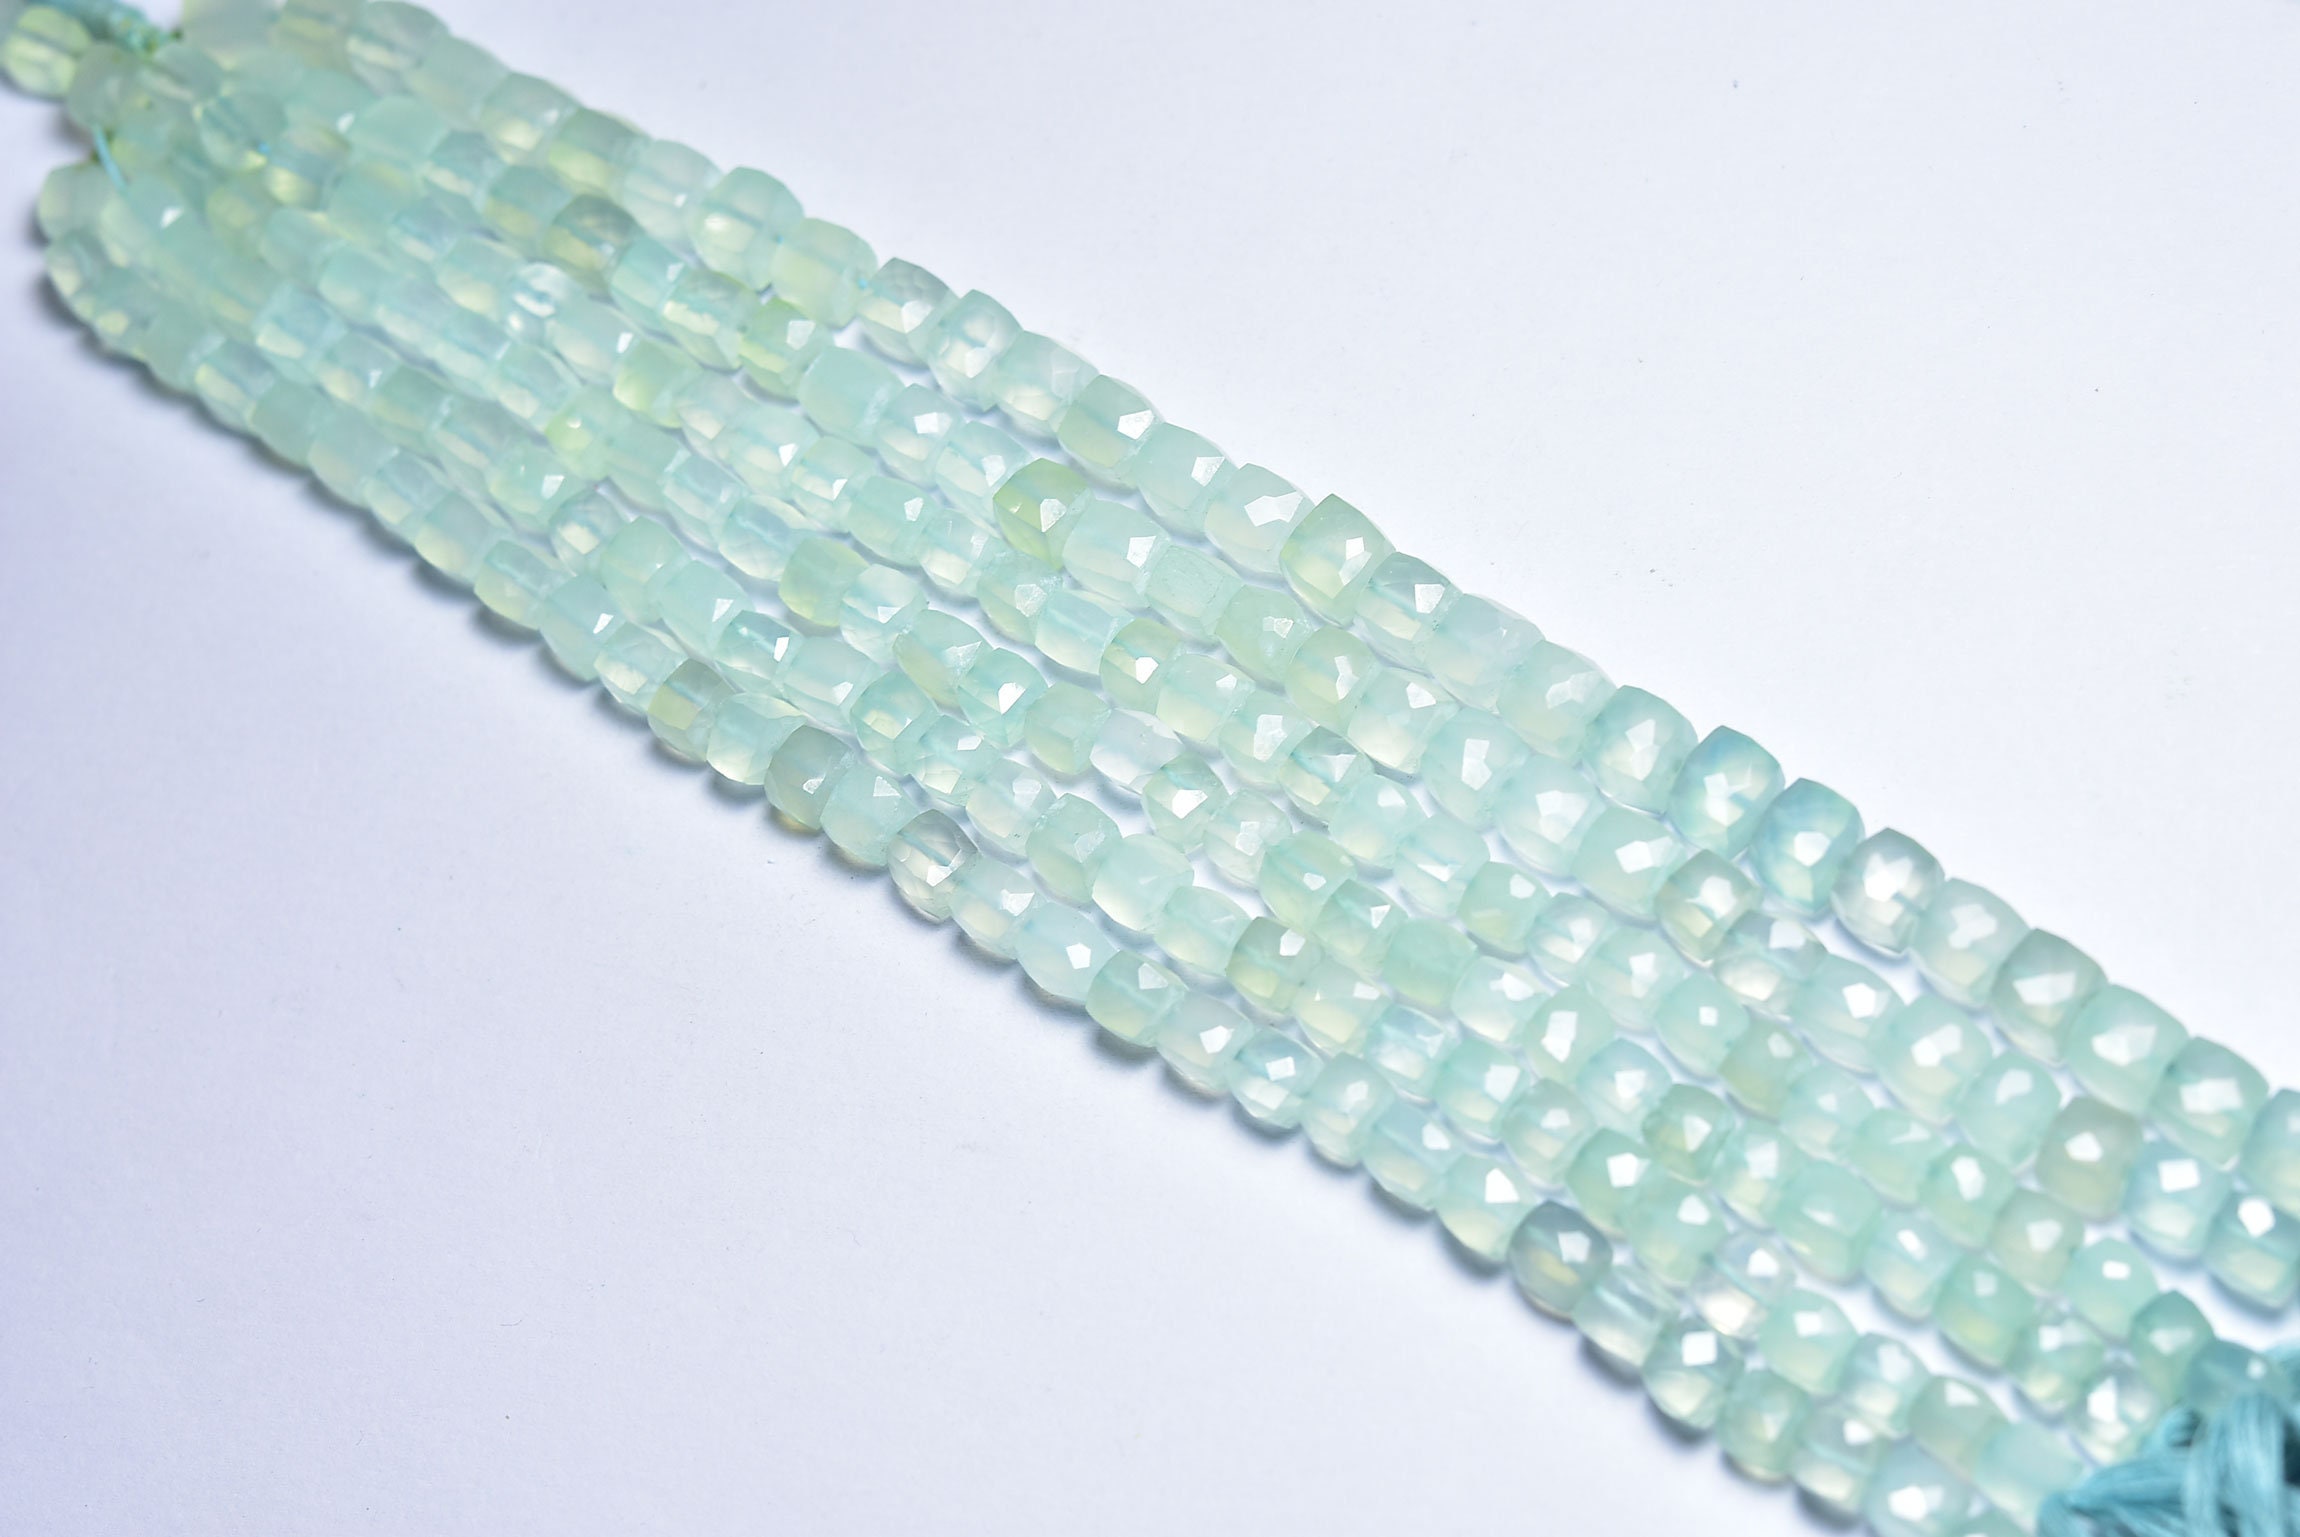 Light Aqua Chalcedony Faceted Cube Gemstone Beads Natural - Etsy